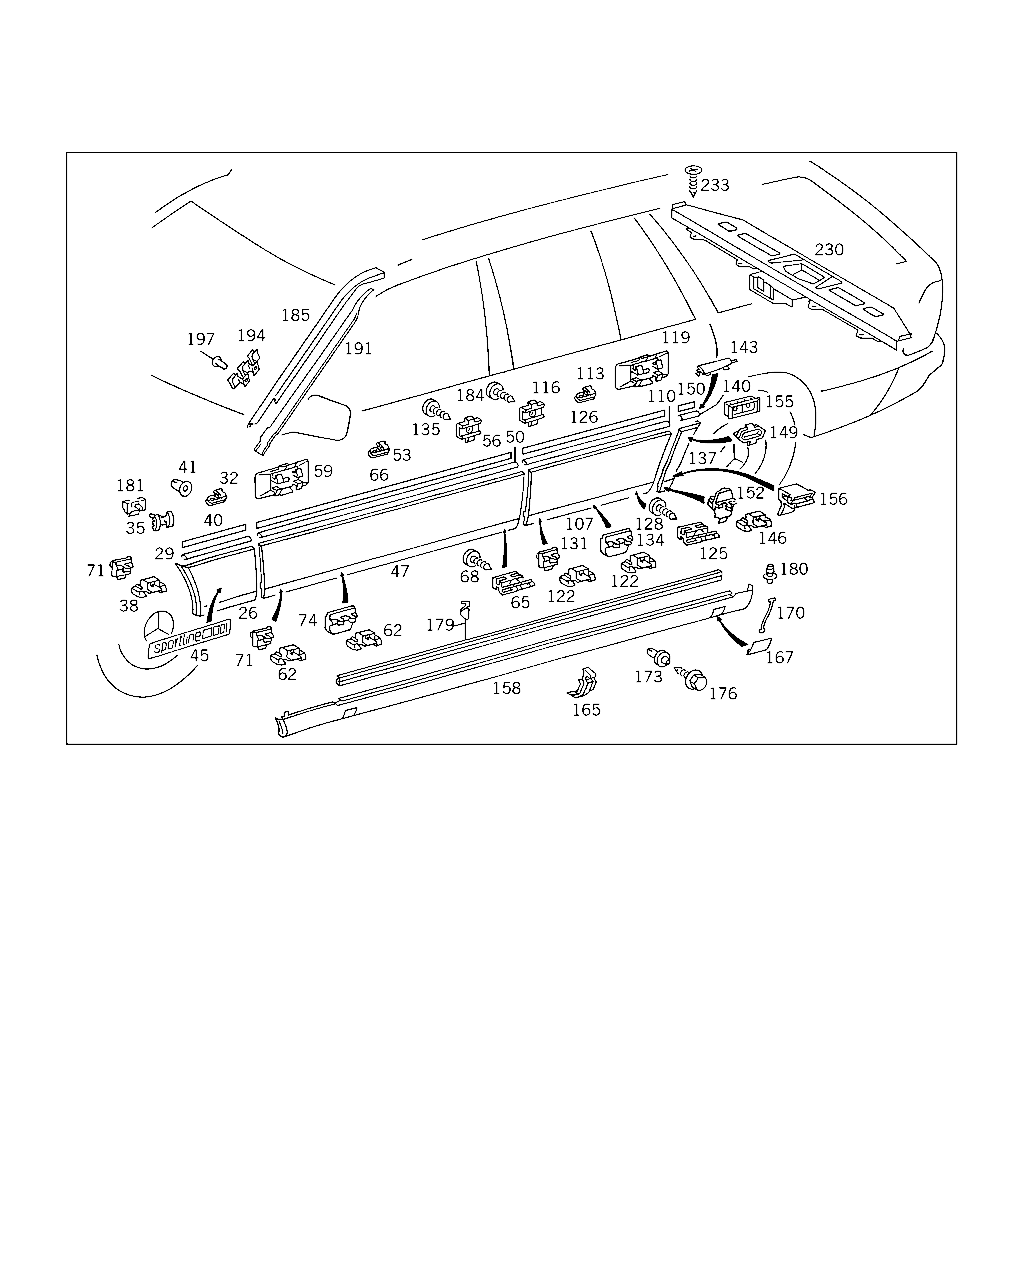 OUTSIDE ATTACHMENT PARTS [Car] MERCEDES [EUROPA] [CHASSIS]280